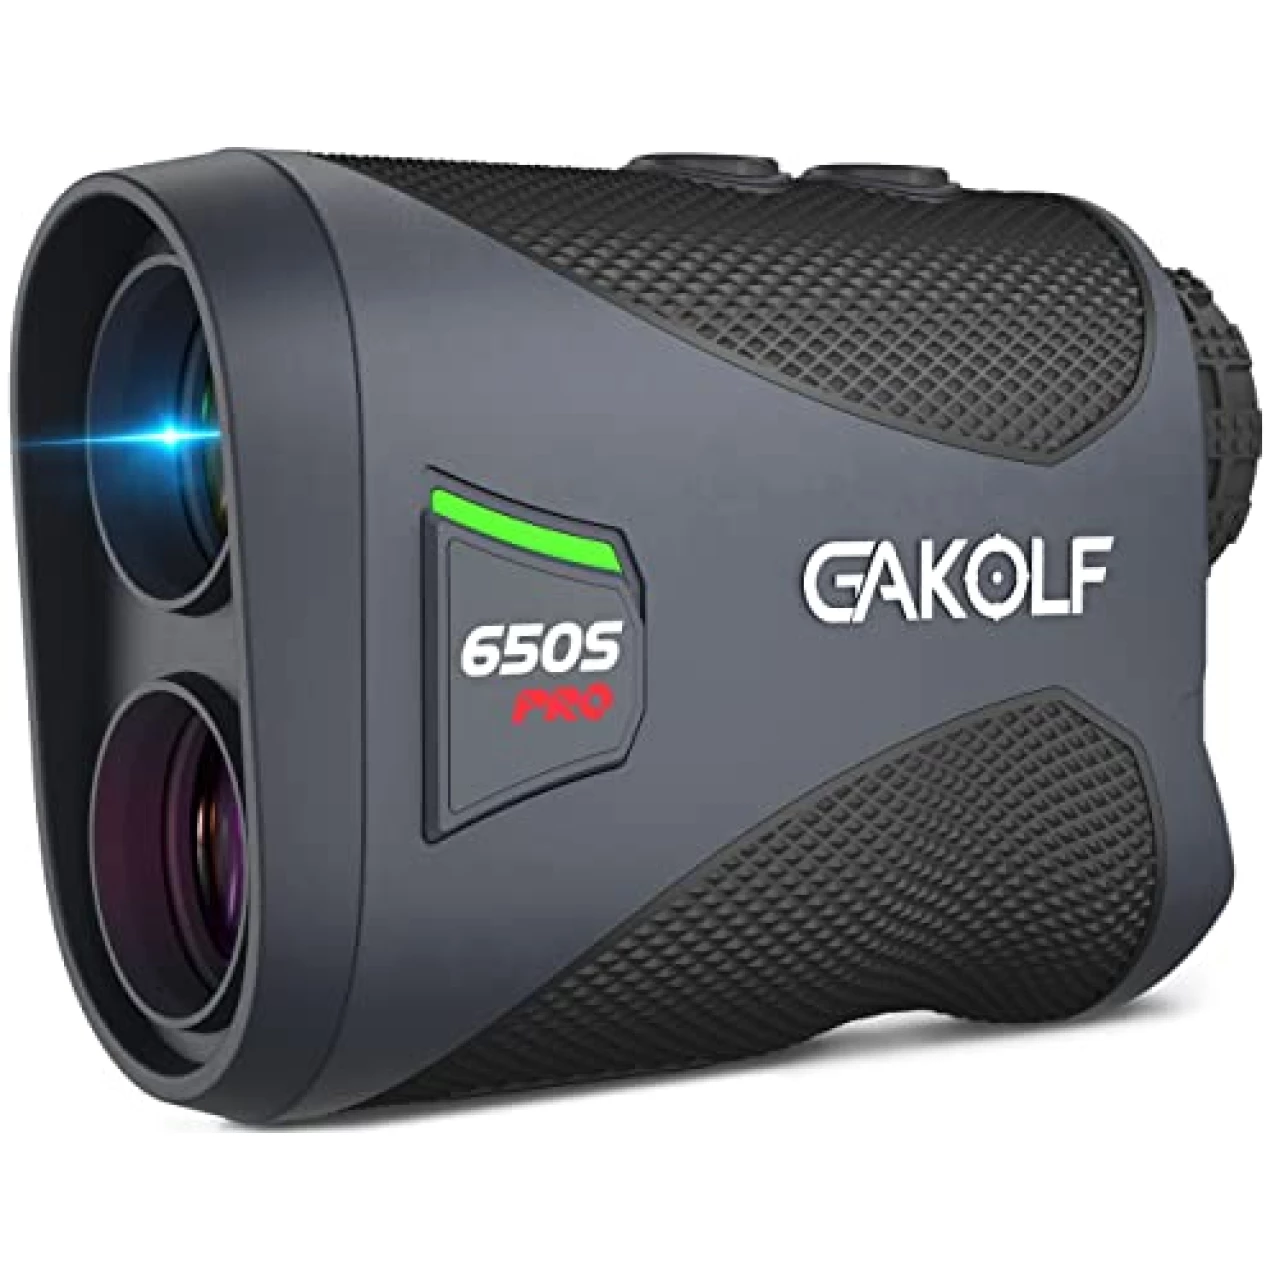 GAKOLF Laser Golf Rangefinder with Slope Switch and Fast Acquisition